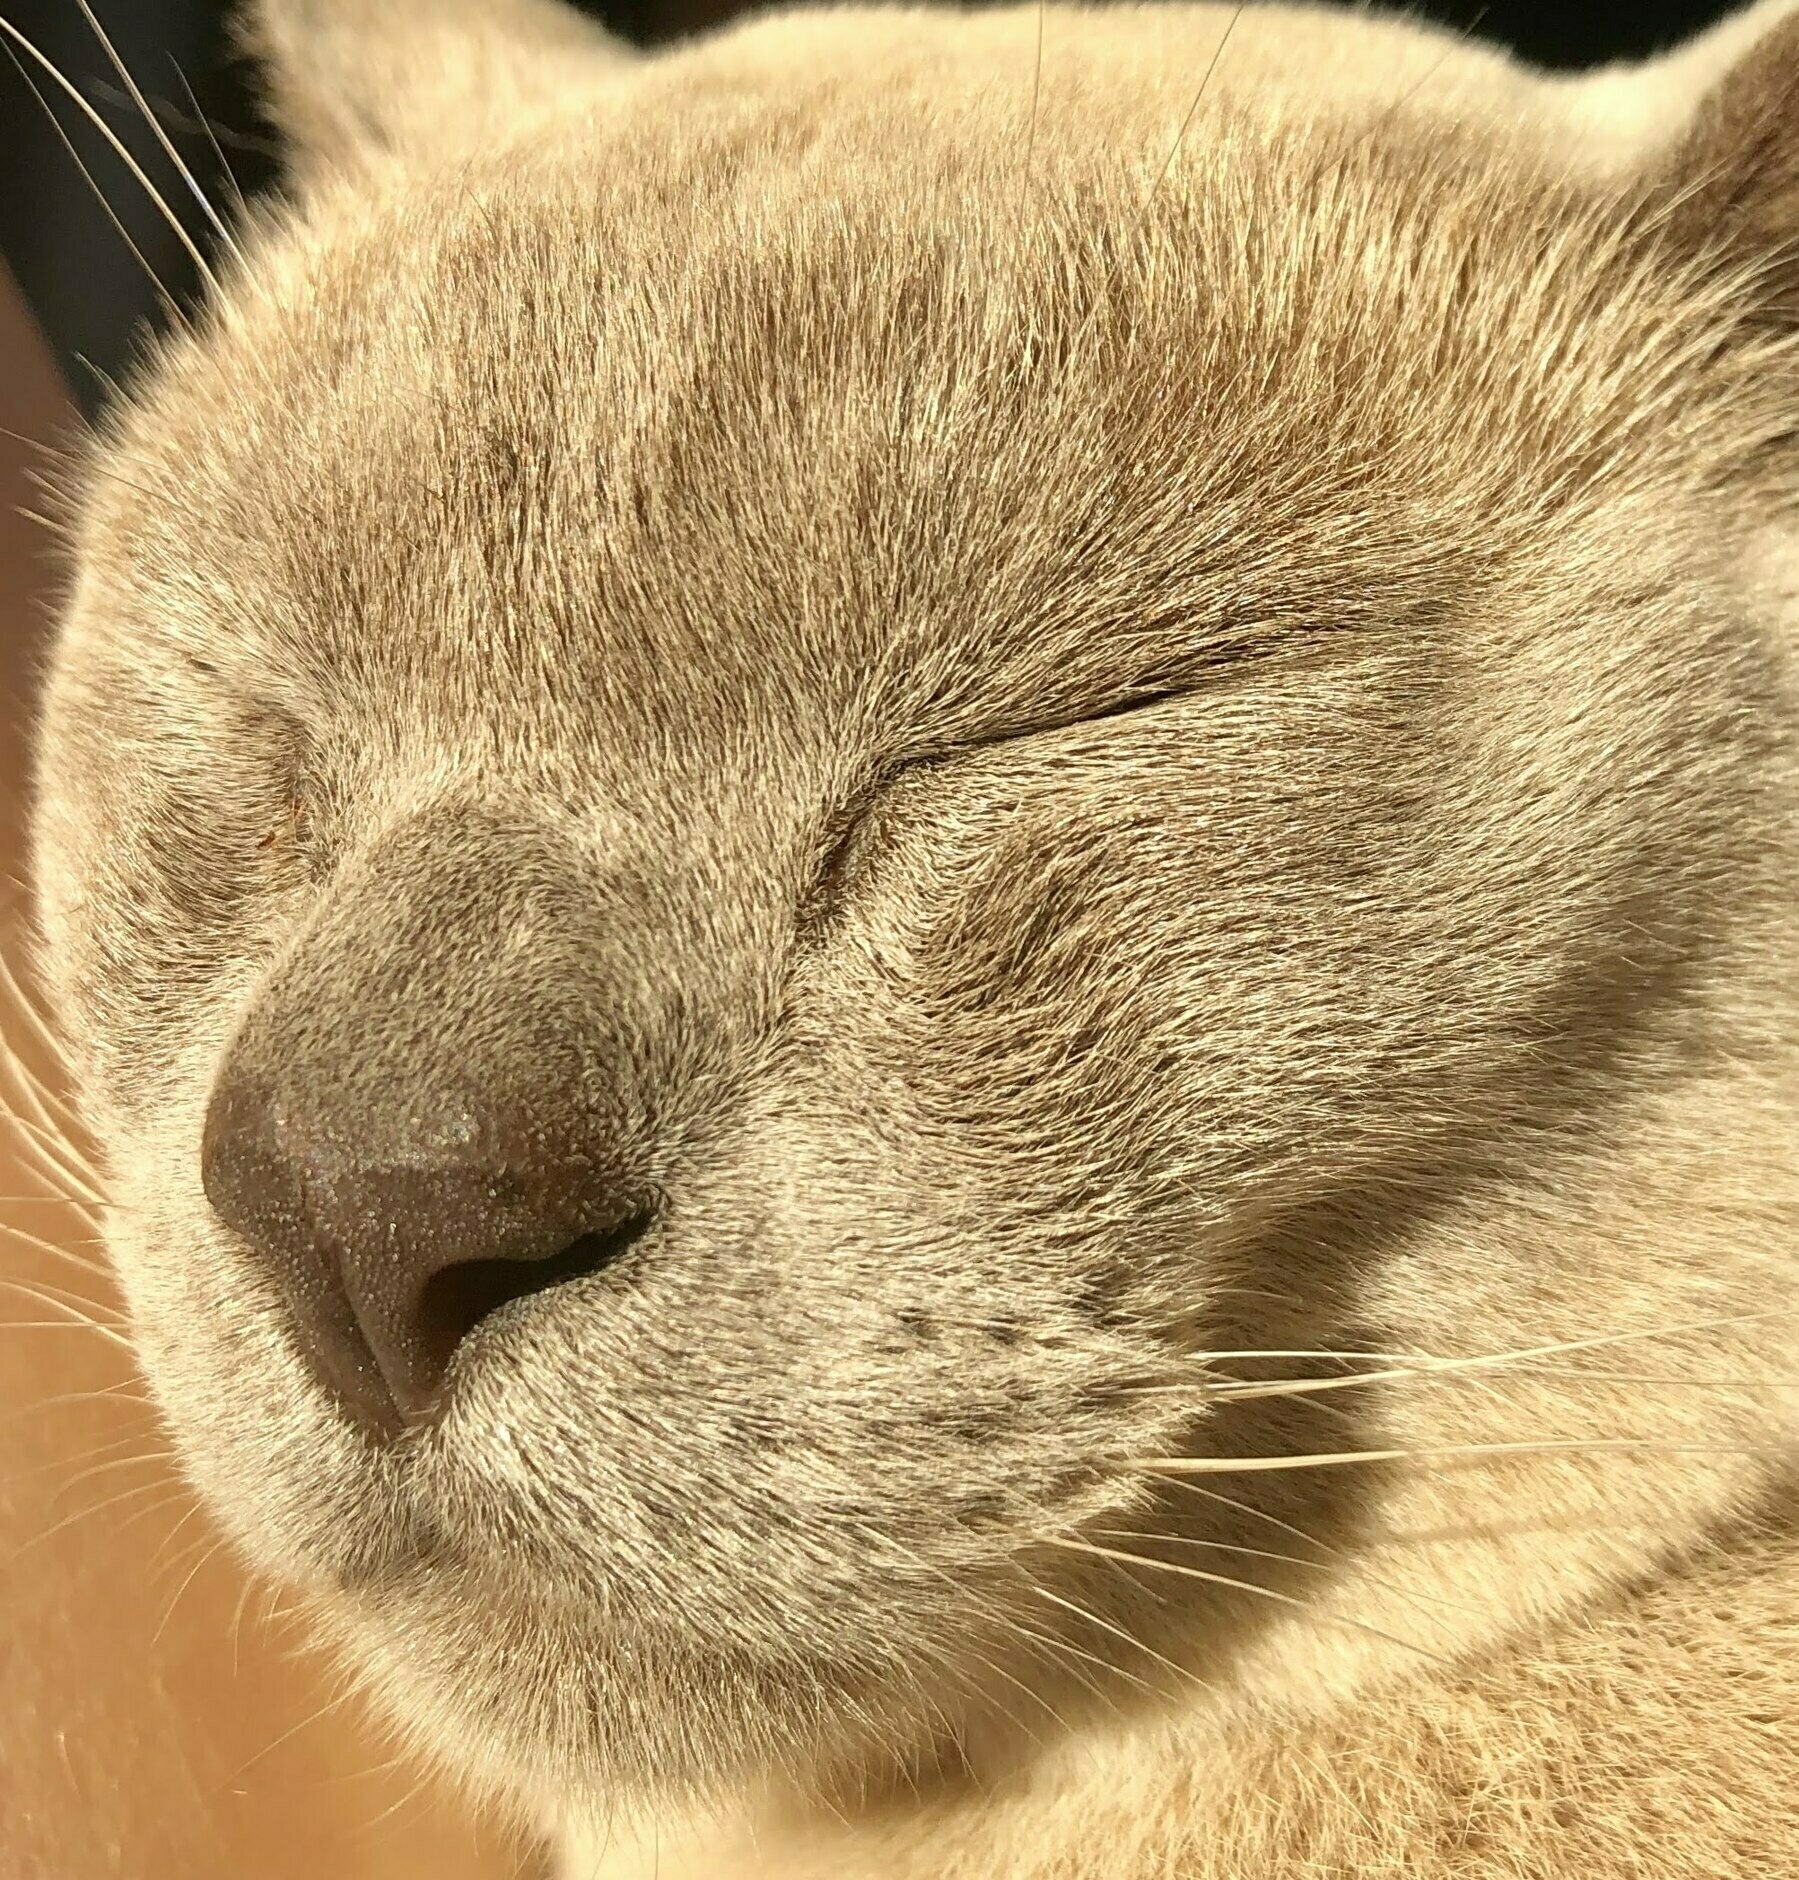 close up of a blue point burmese cat's face, eyes closed, bathed in sunlight.